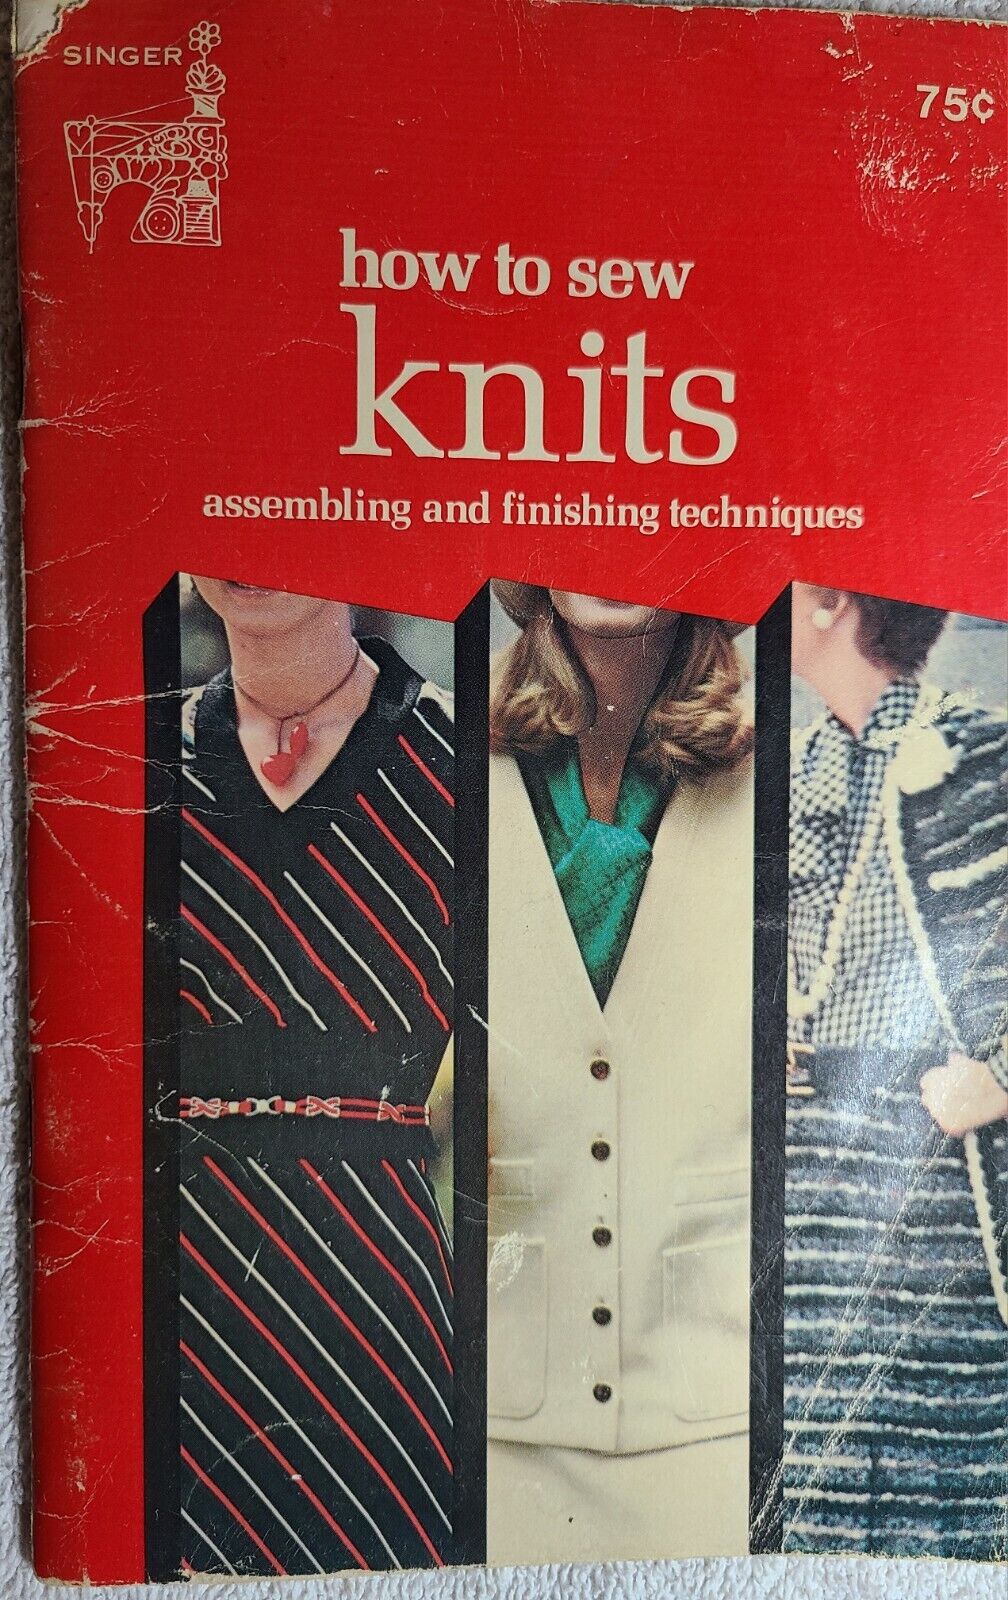 1974 Singer How To Sew Knits Book Assembling & Finish Techniques